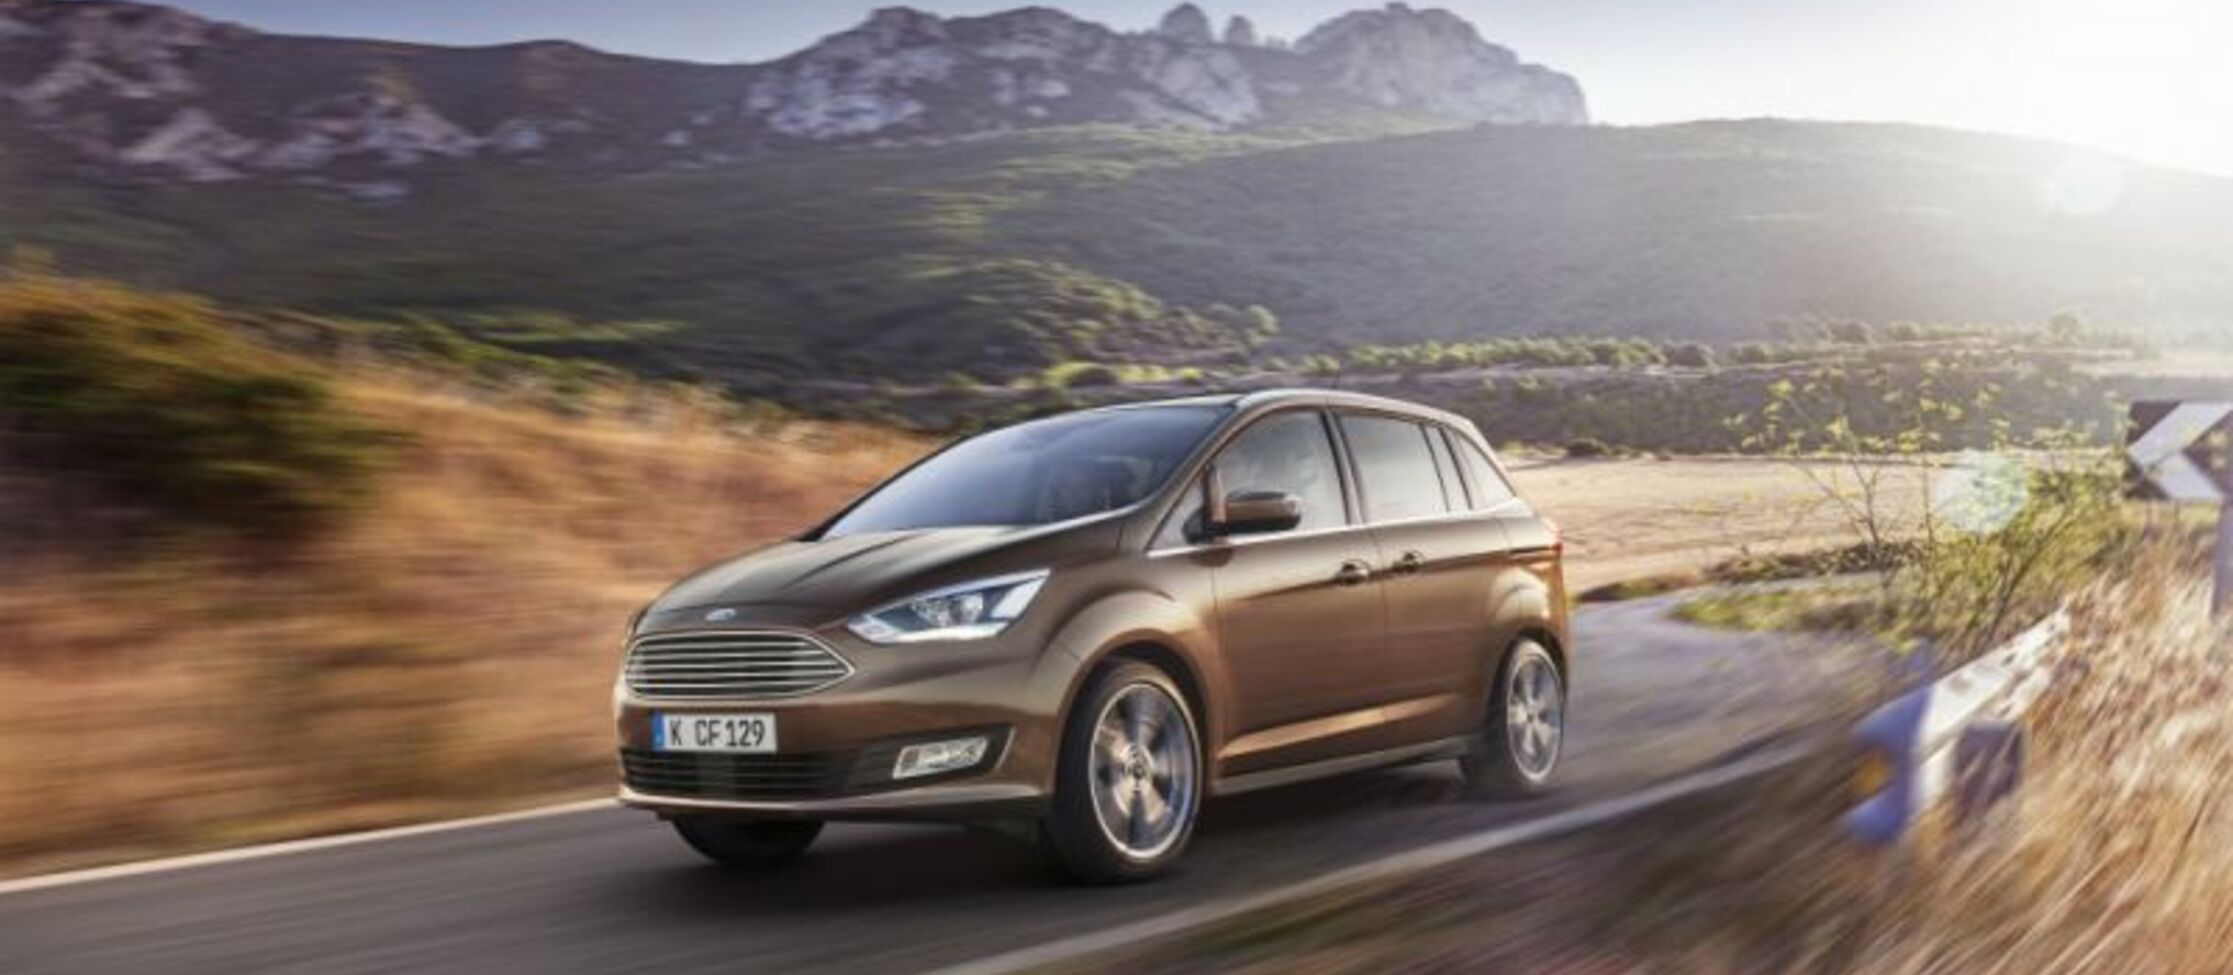 Ford Grand C-MAX (facelift 2015) 1.0 EcoBoost (100 Hp) S&S 2015, 2016, 2017, 2018, 2019, 2020, 2021 